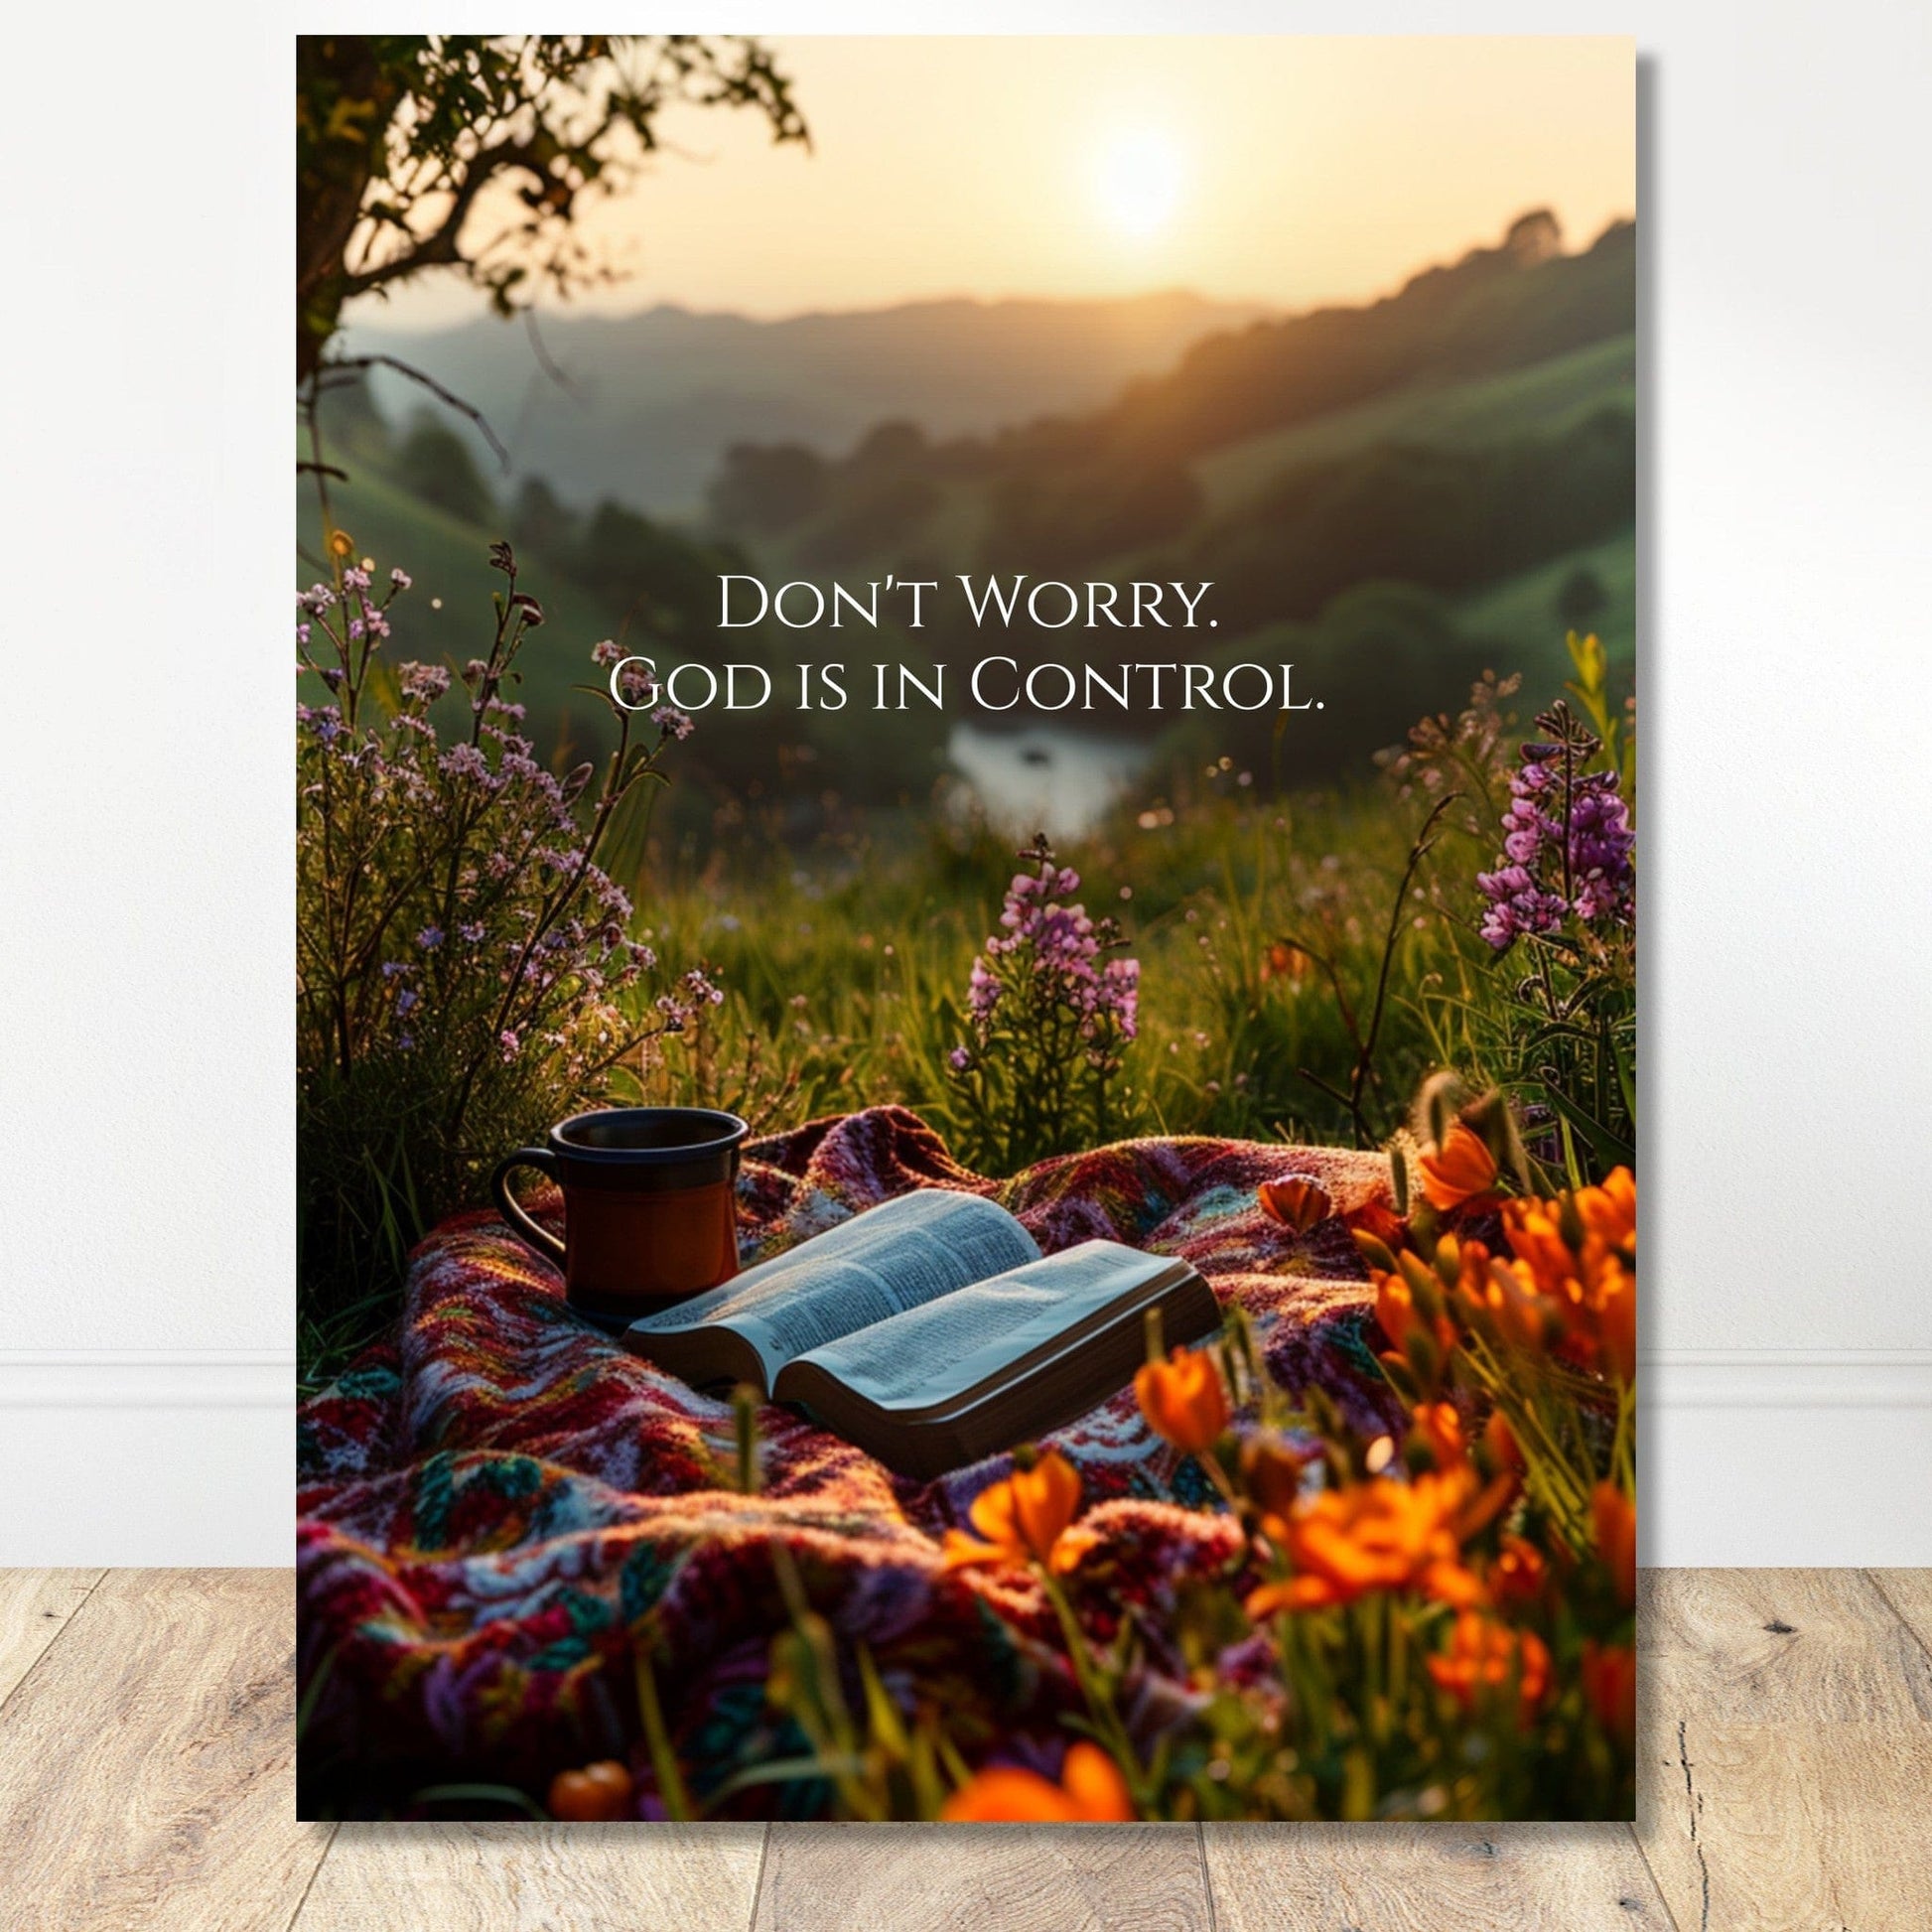 Coffee With My Father Print Material 30x40 cm / 12x16″ / Premium Matte Paper Poster / Unframed Premium Matte Paper Wooden Framed Poster